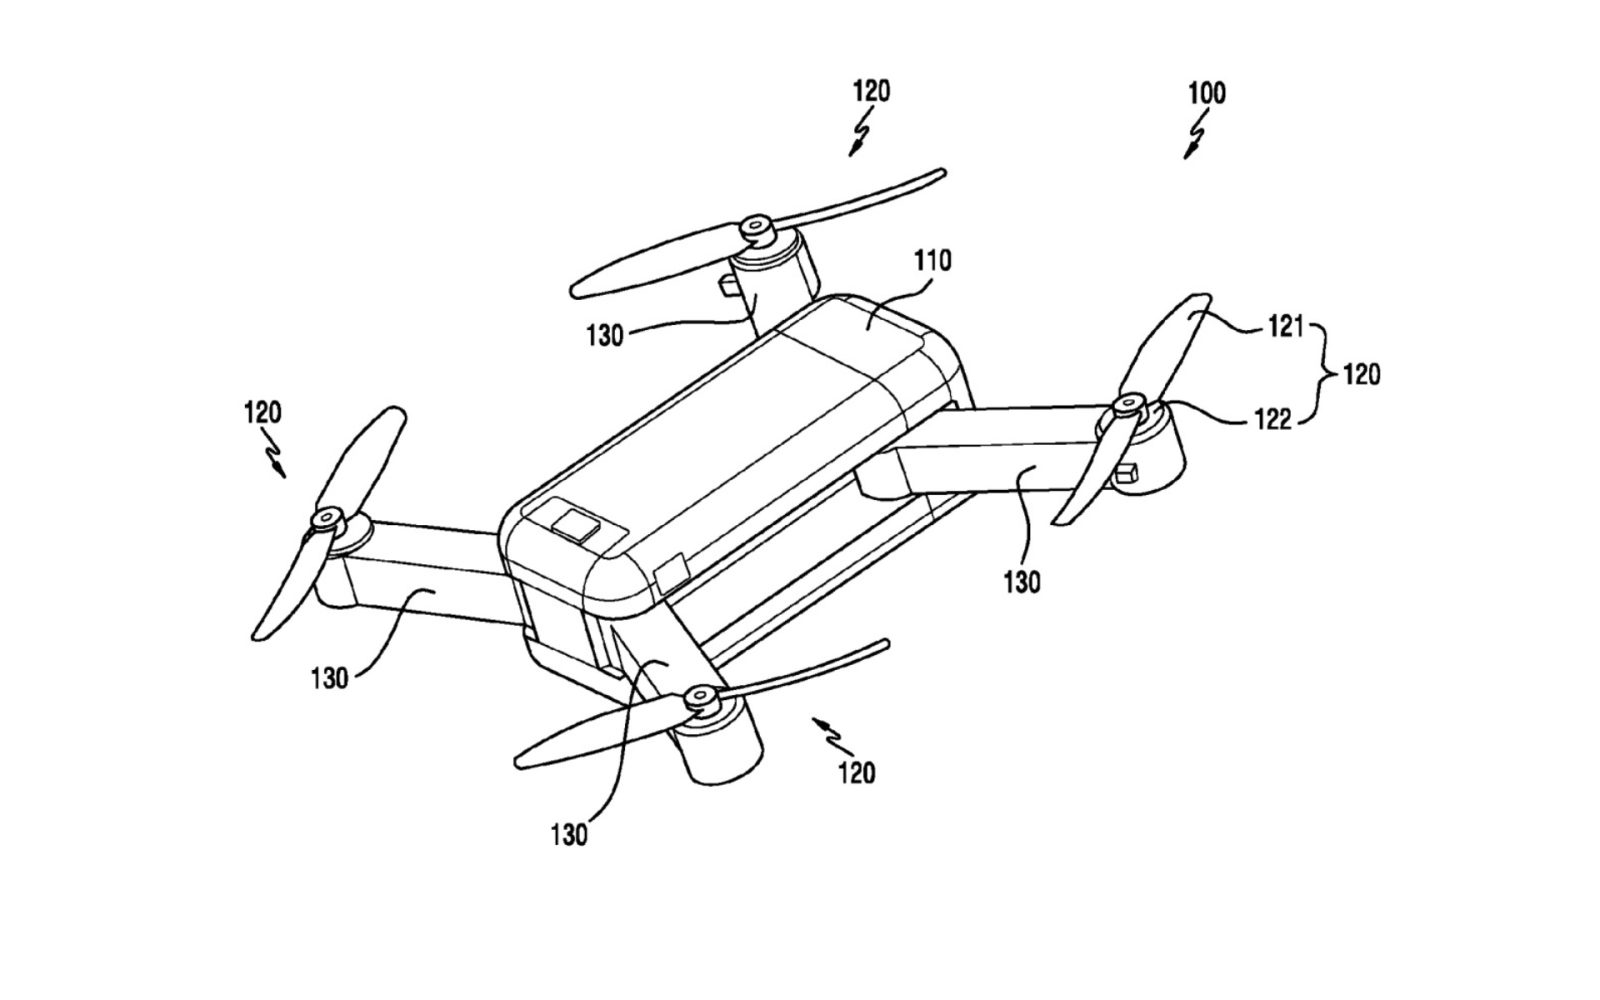 Will Samsung ever actually make a drone or just keep filing patents?